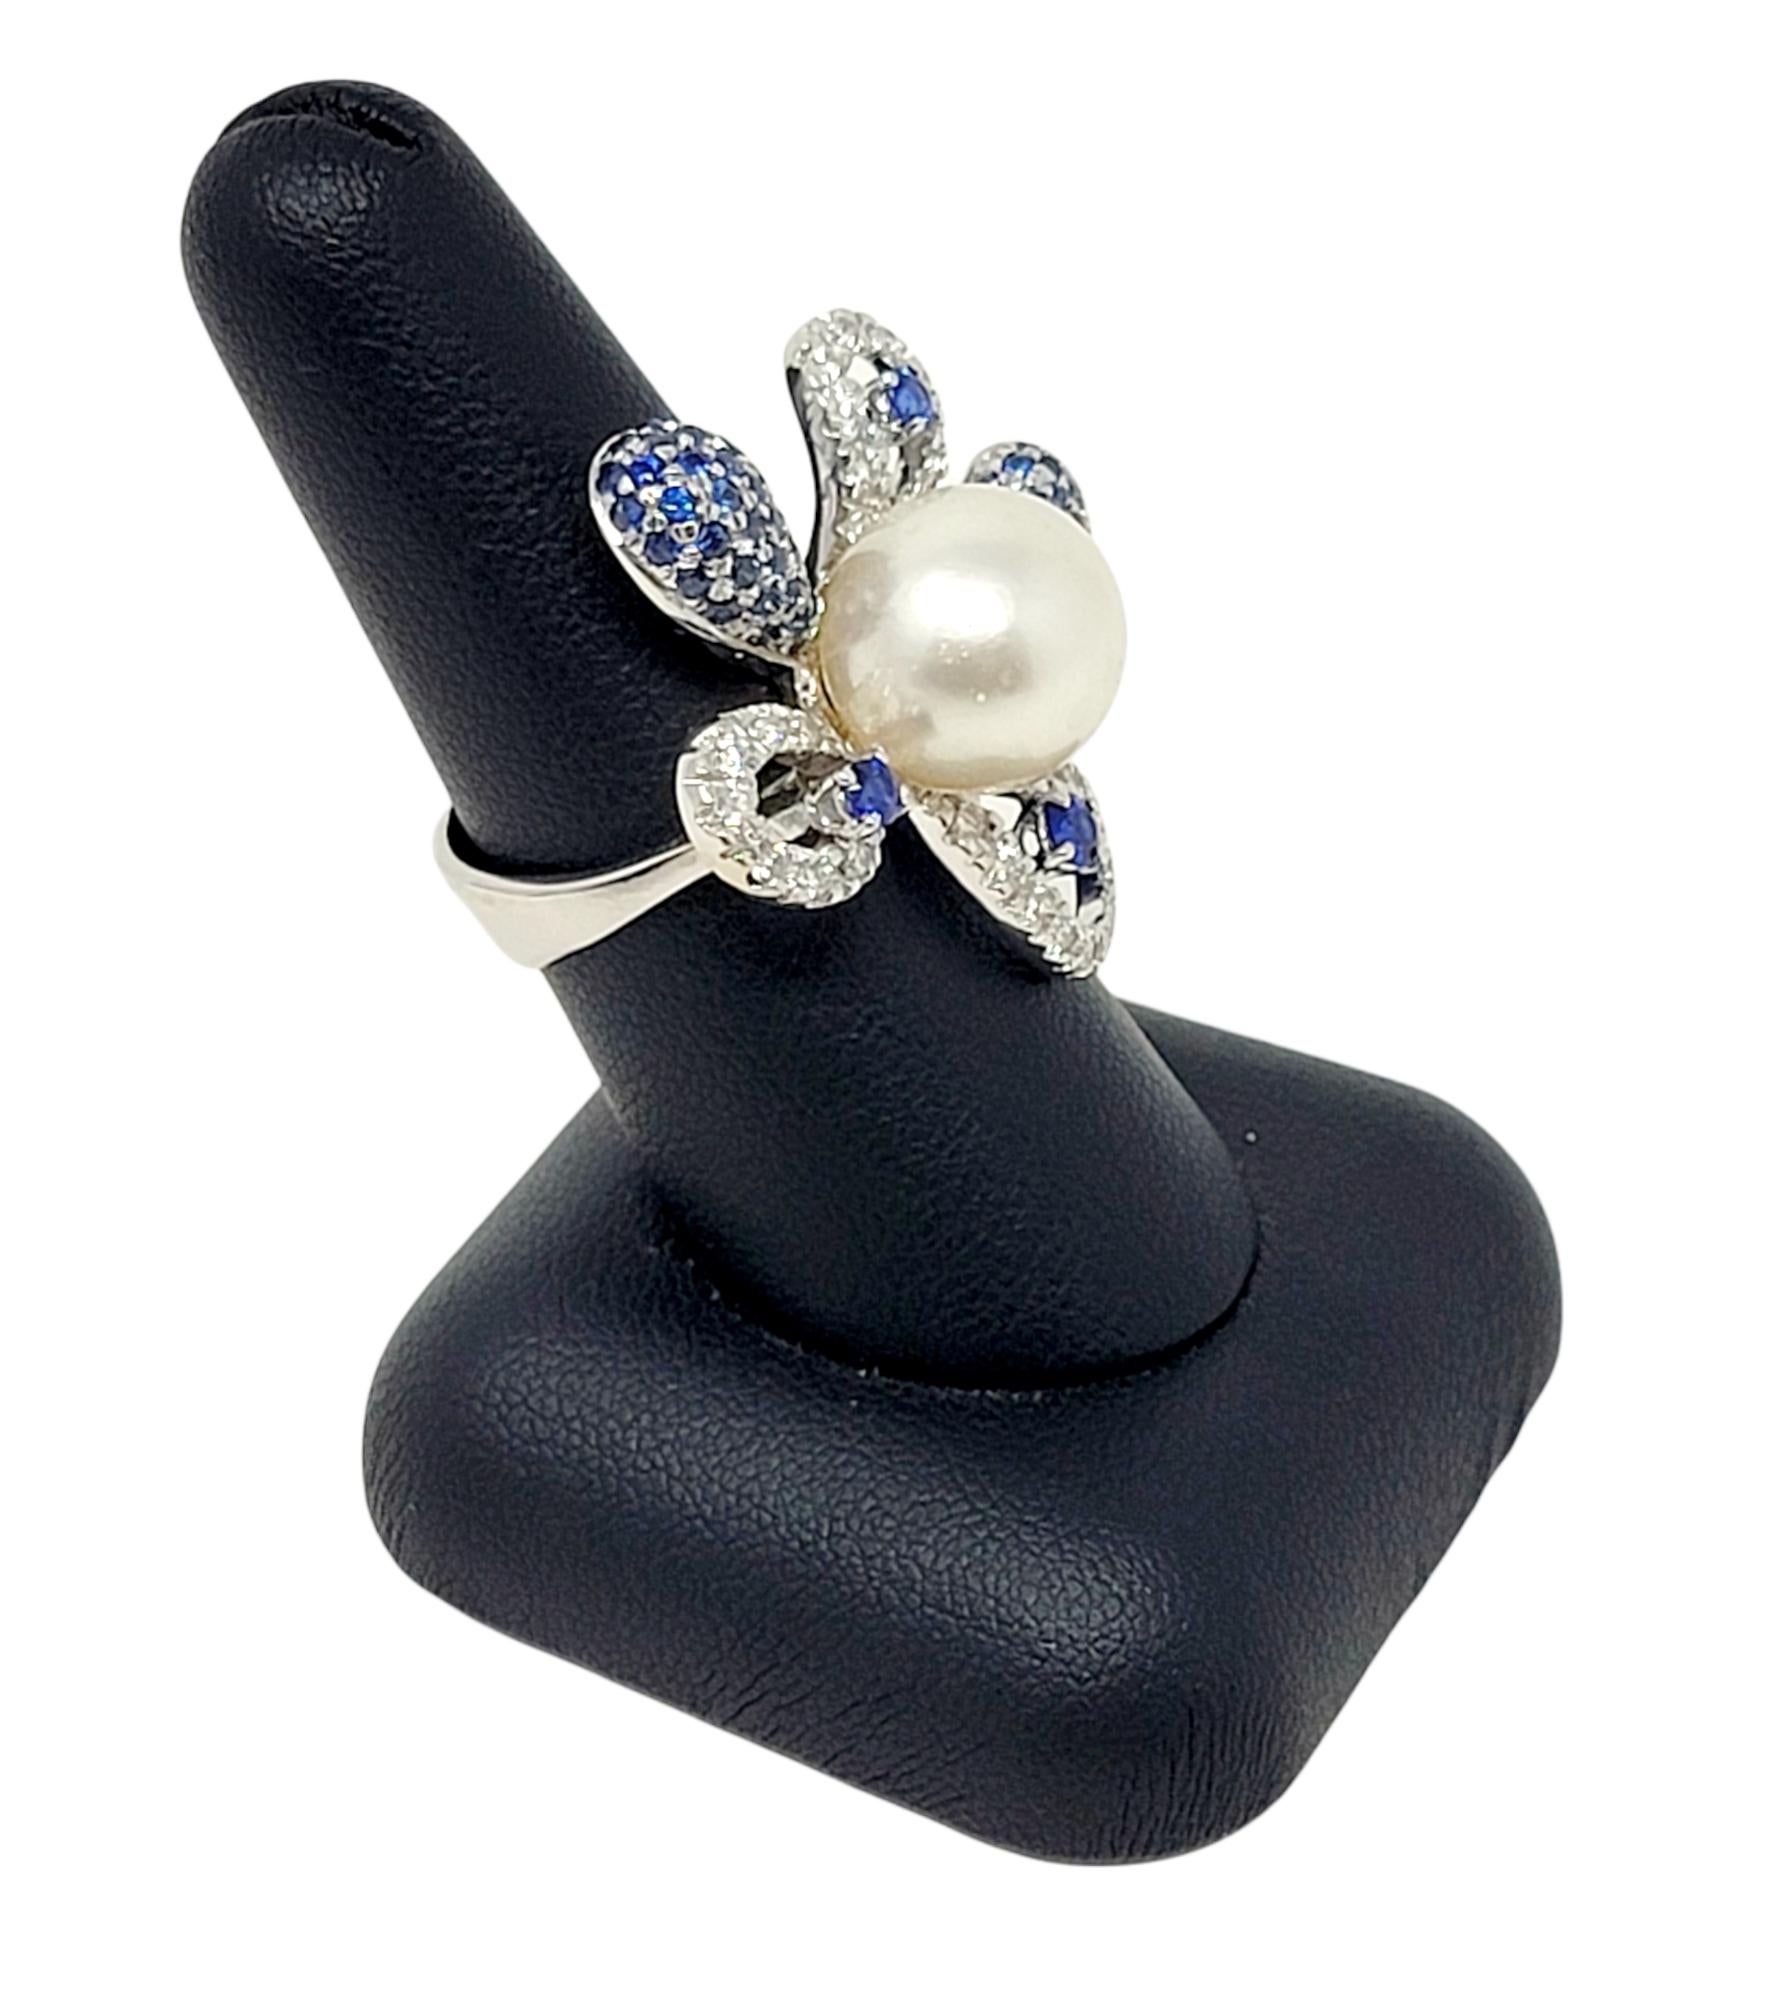 South Sea Cultured Pearl Flower Cocktail Ring with Diamond and Sapphire Petals For Sale 6